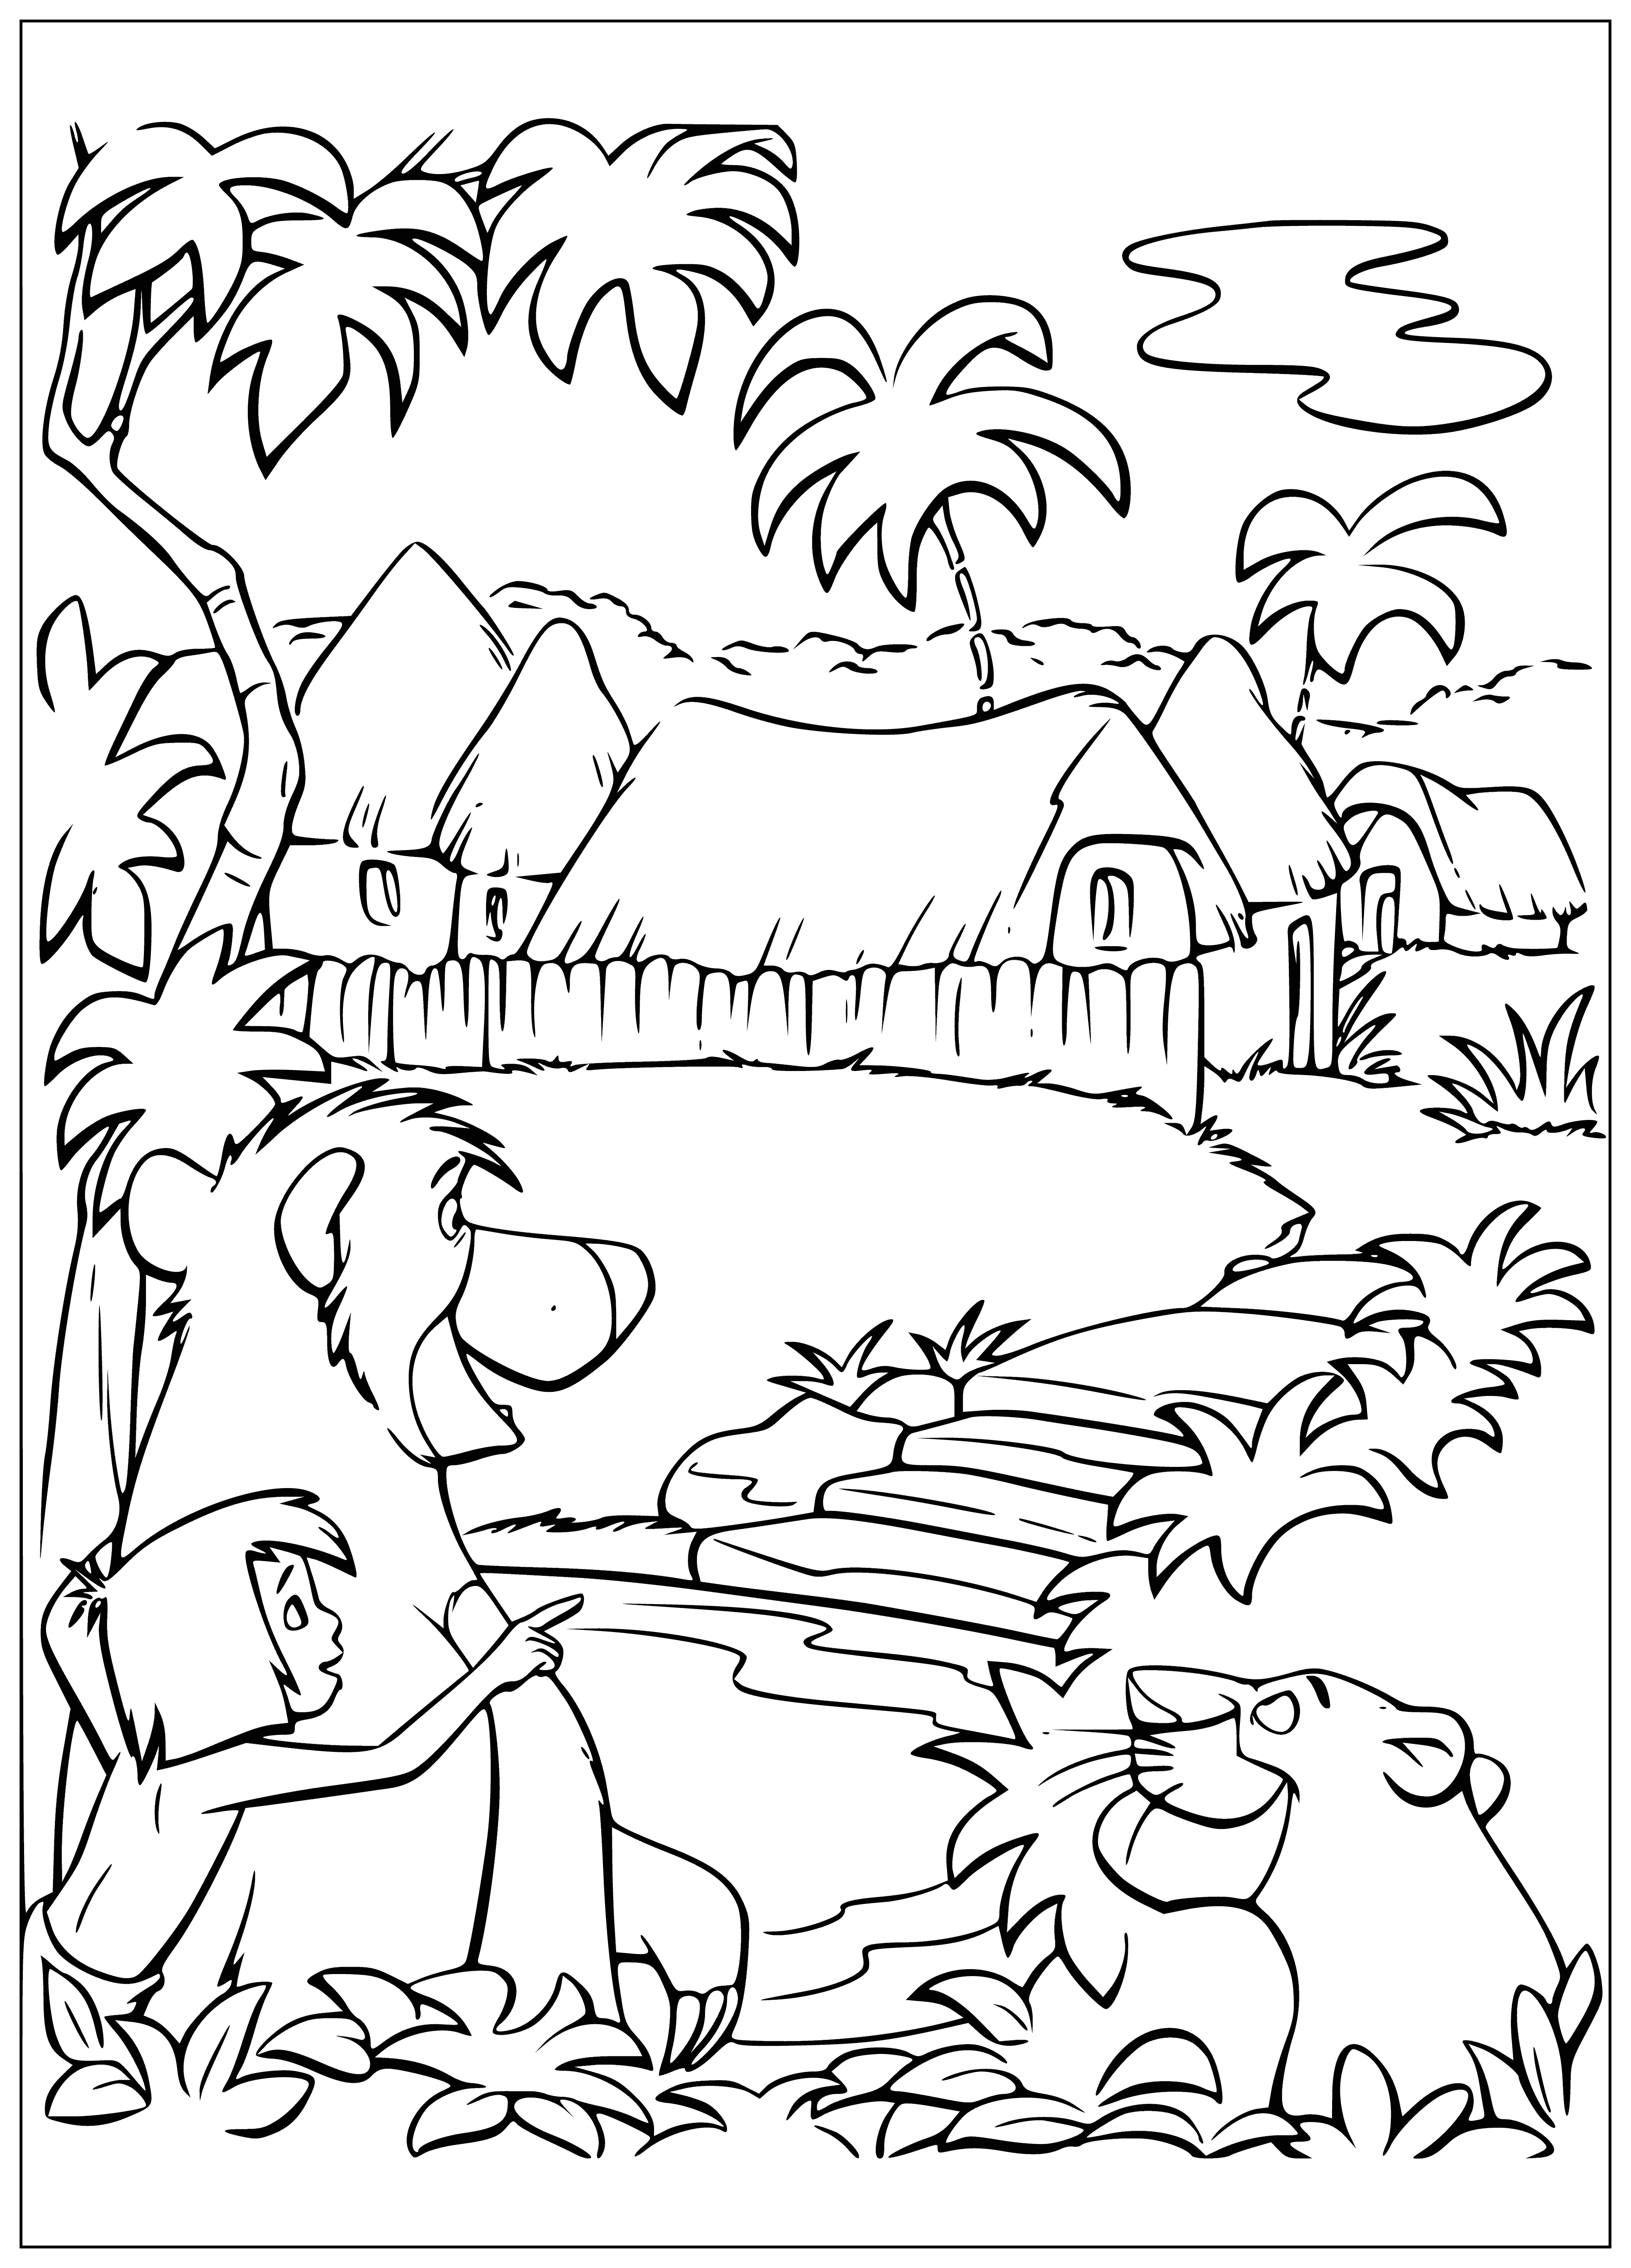 coloring page: Village has huts made of sticks/leaves, fire in center, people around it cooking & children playing on ground.